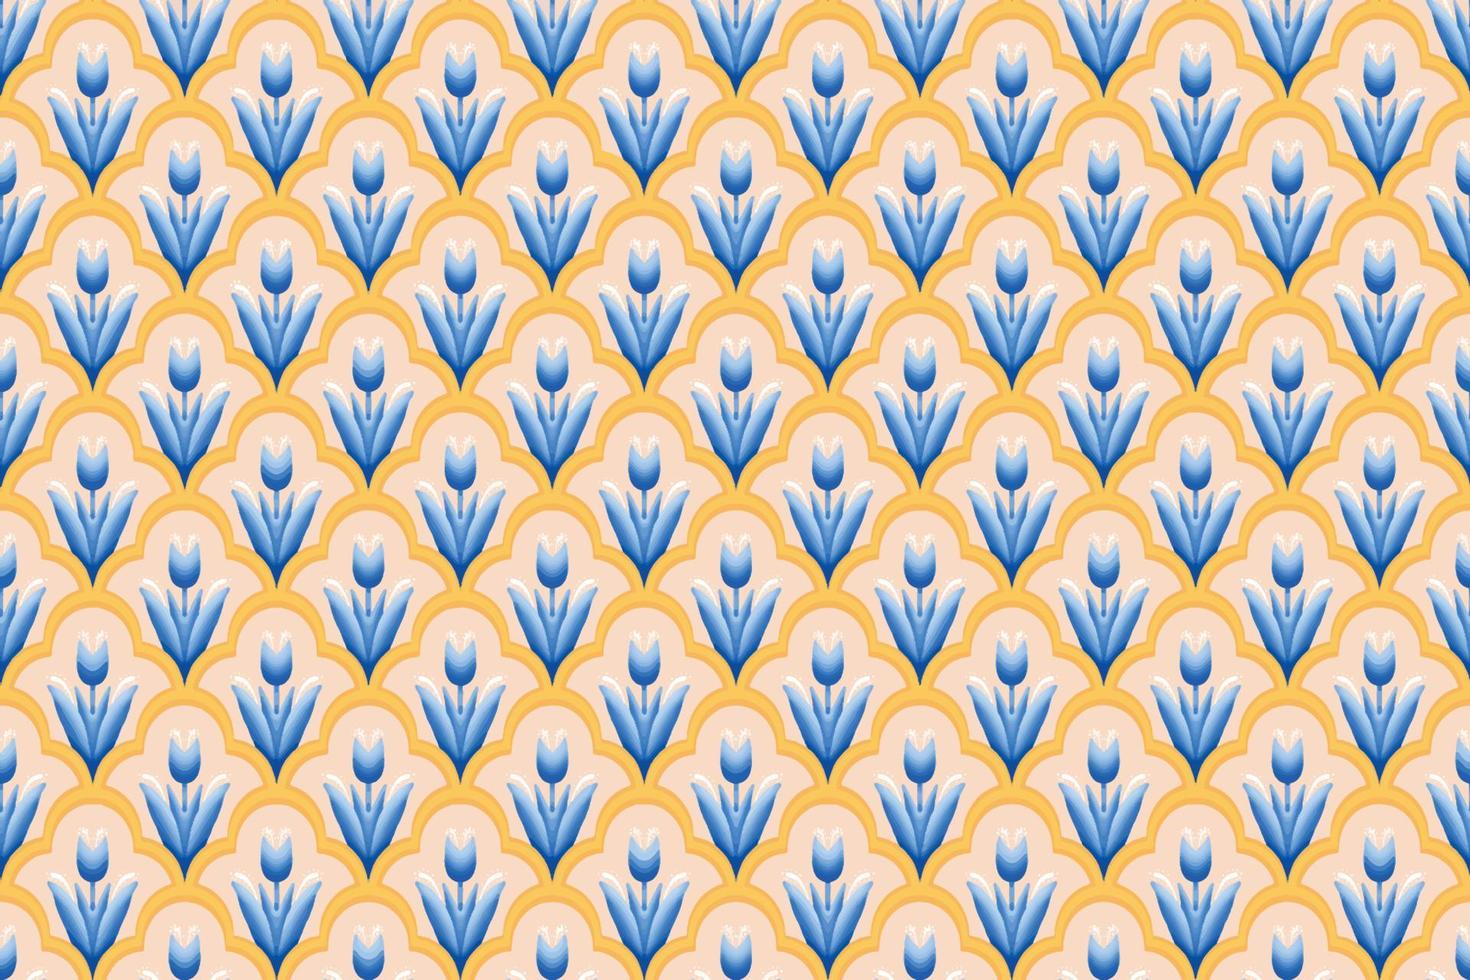 Blue Flower on Ivory, White, Yellow Geometric ethnic oriental pattern traditional Design for background,carpet,wallpaper,clothing,wrapping,Batik,fabric, vector illustration embroidery style